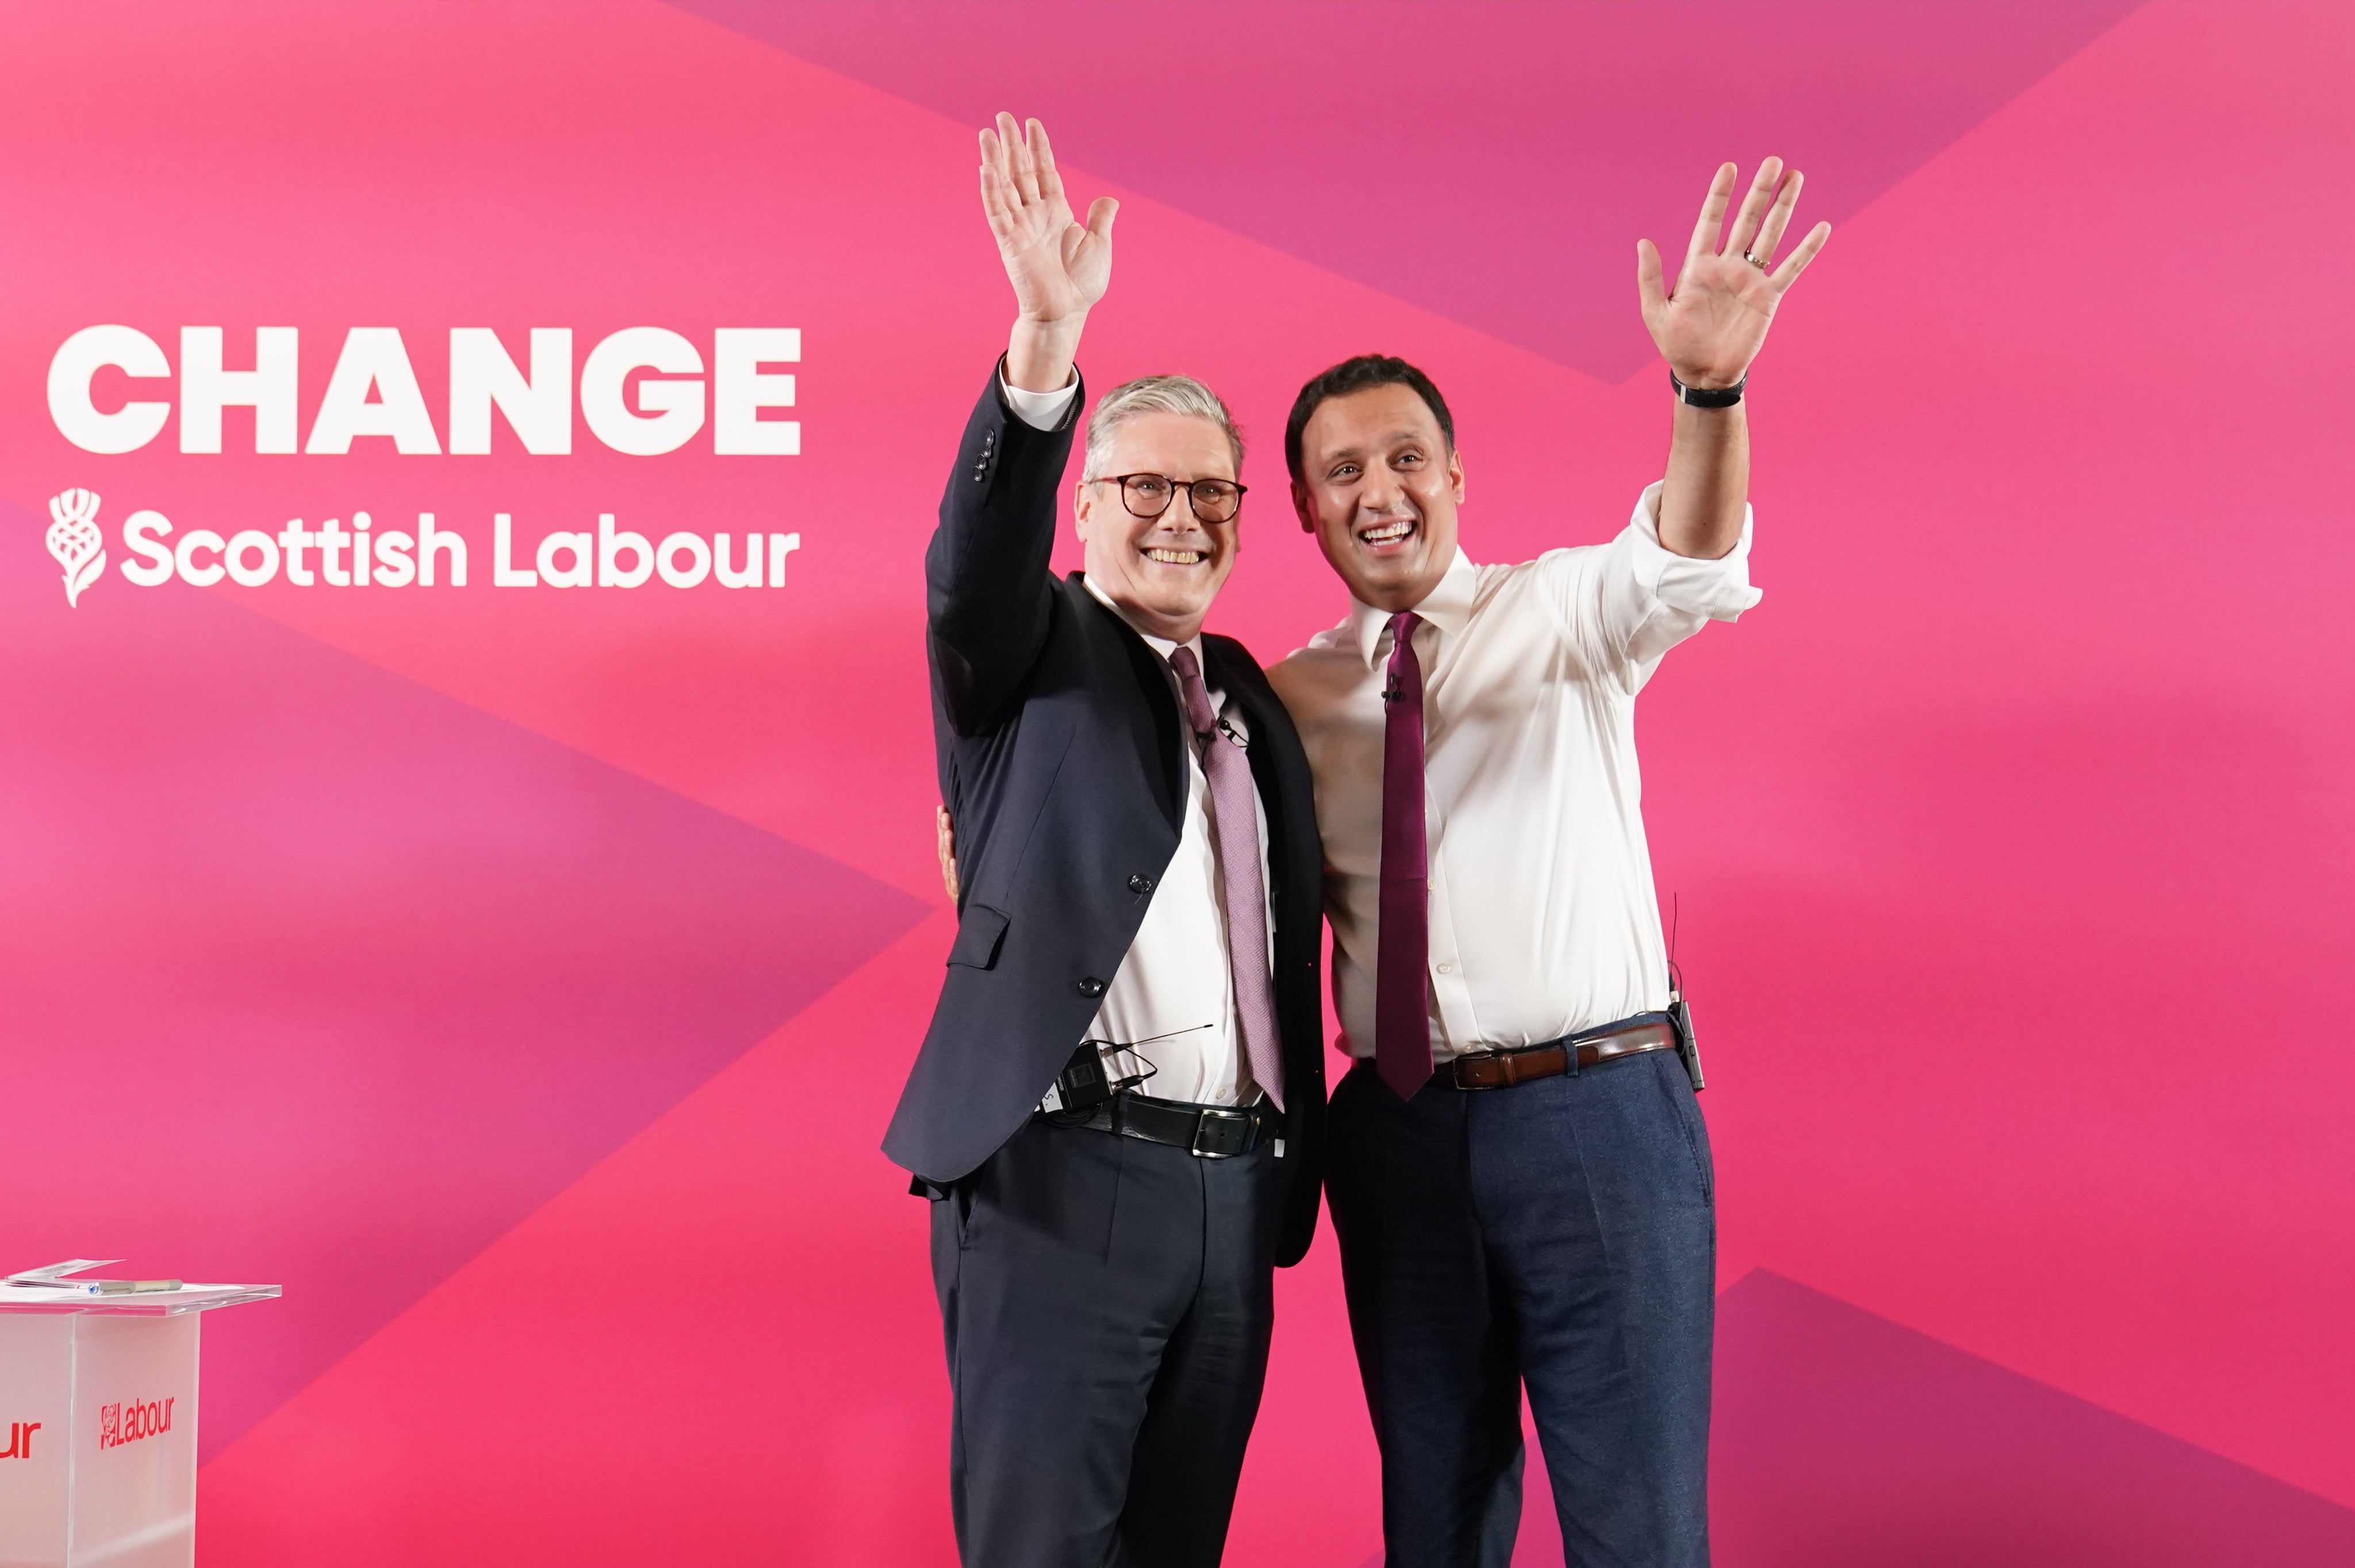 Labour Party leader Sir Keir Starmer (left) and Scottish Labour leader Anas Sarwar at a launch event for Labour's six steps for change - their doorstep offer to Scots - at the Beacons Art Centre in Custom House Quay, Greenock